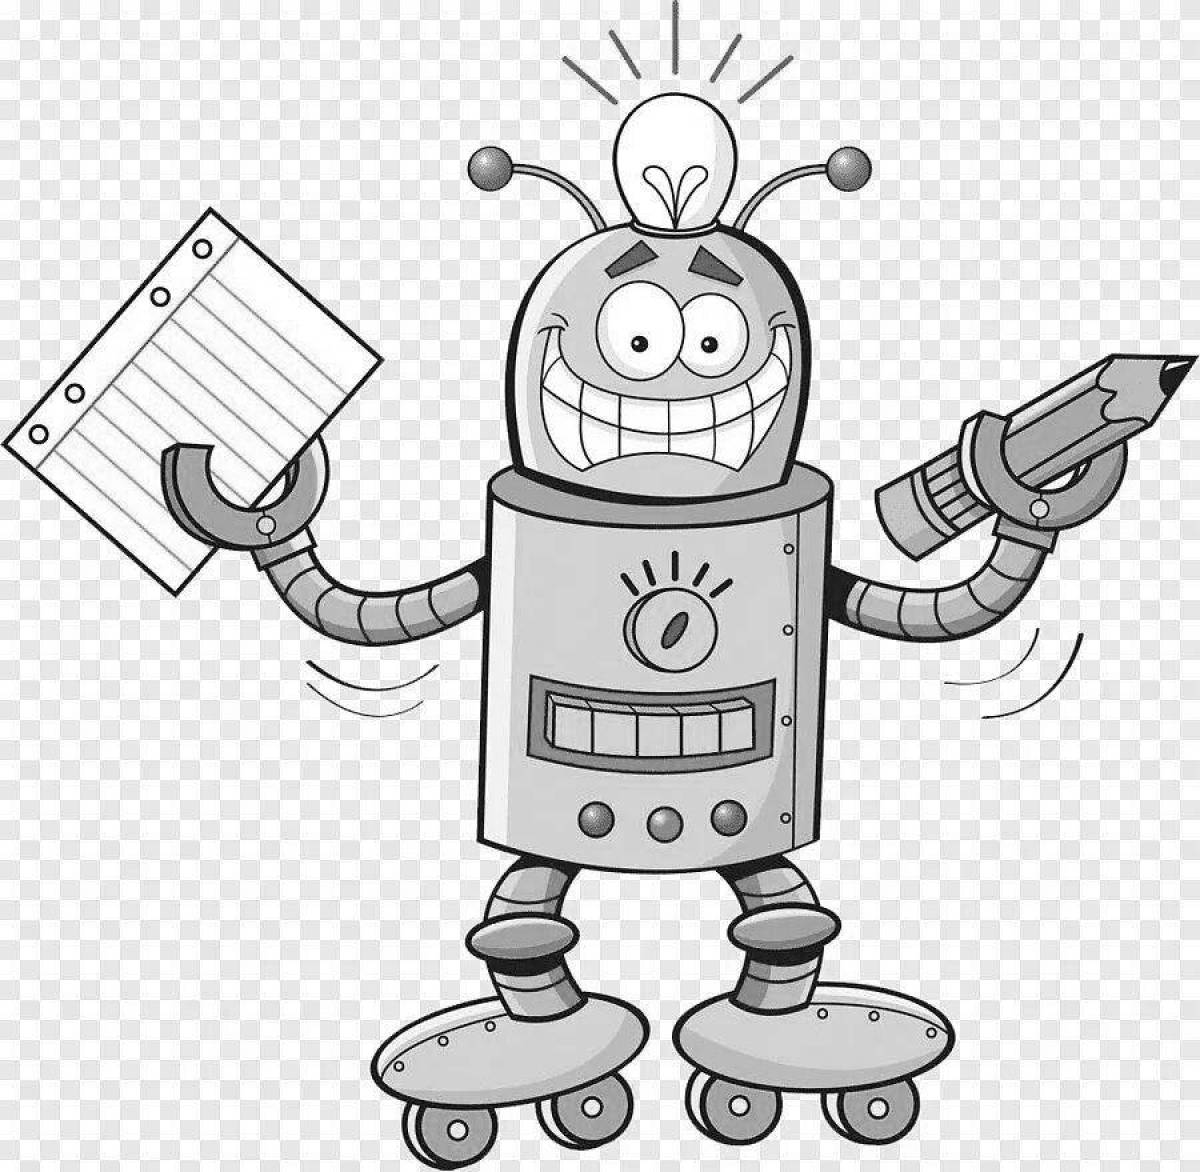 Coloring page of the outgoing robot teacher